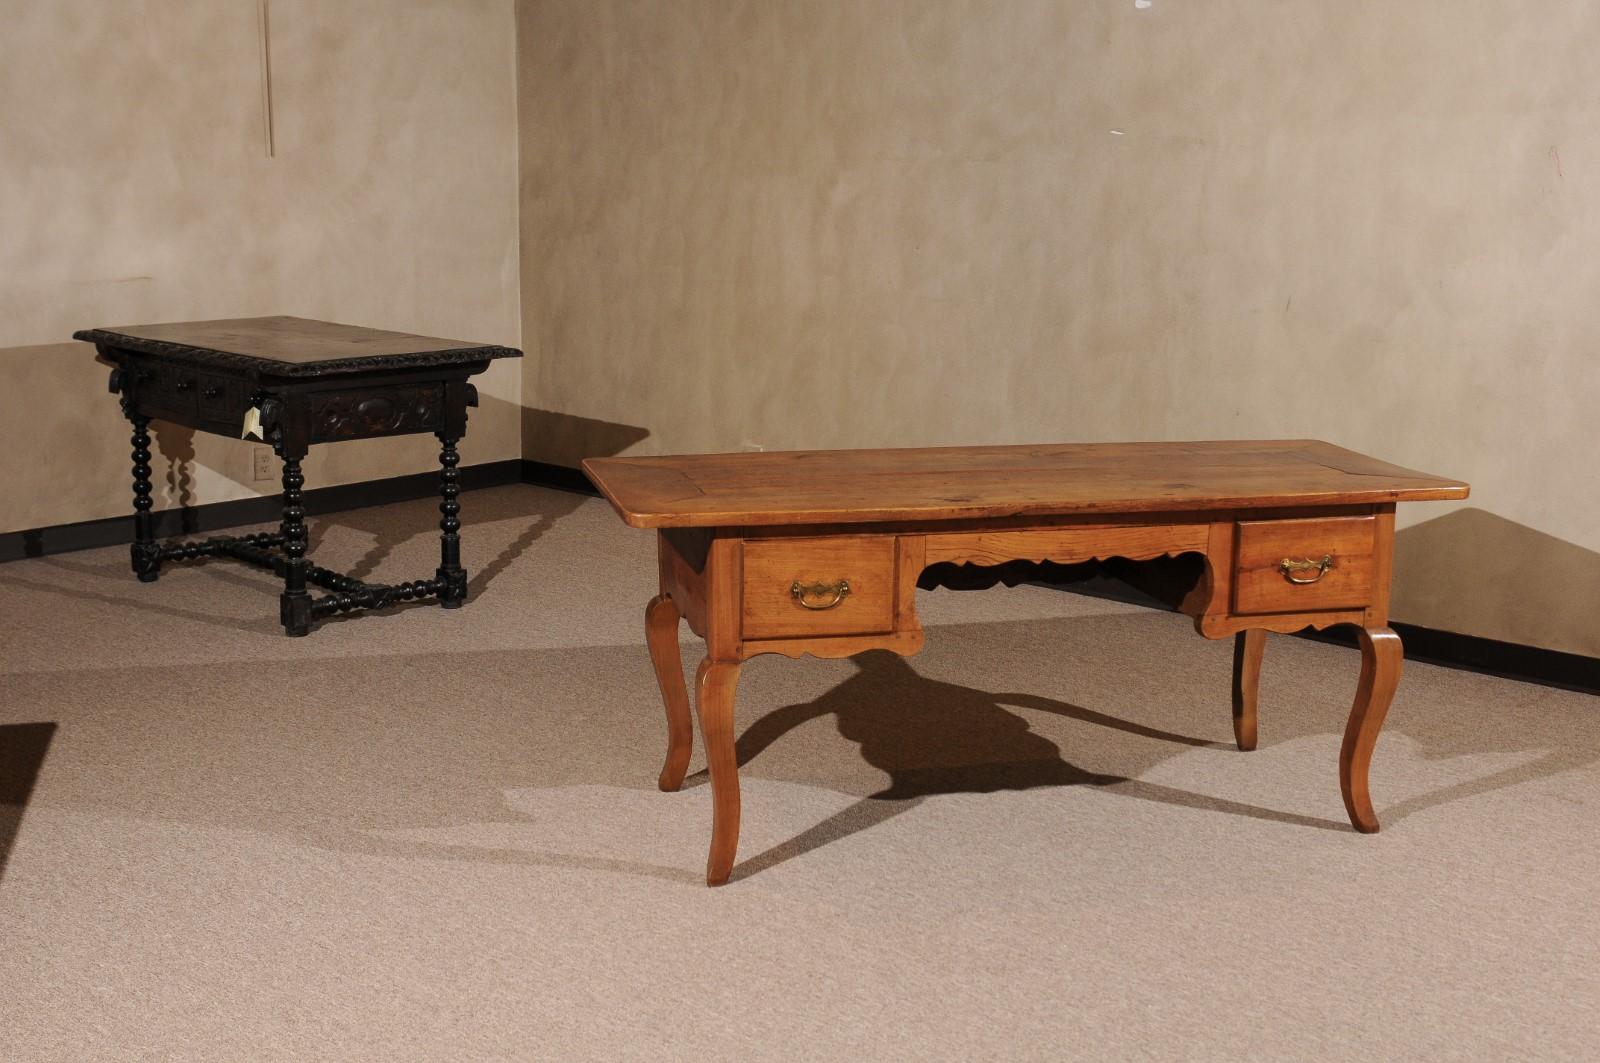 Provincial Louis XV style fruitwood desk with two (2) drawers, shaped apron, and cabriole legs, 19th century, France.